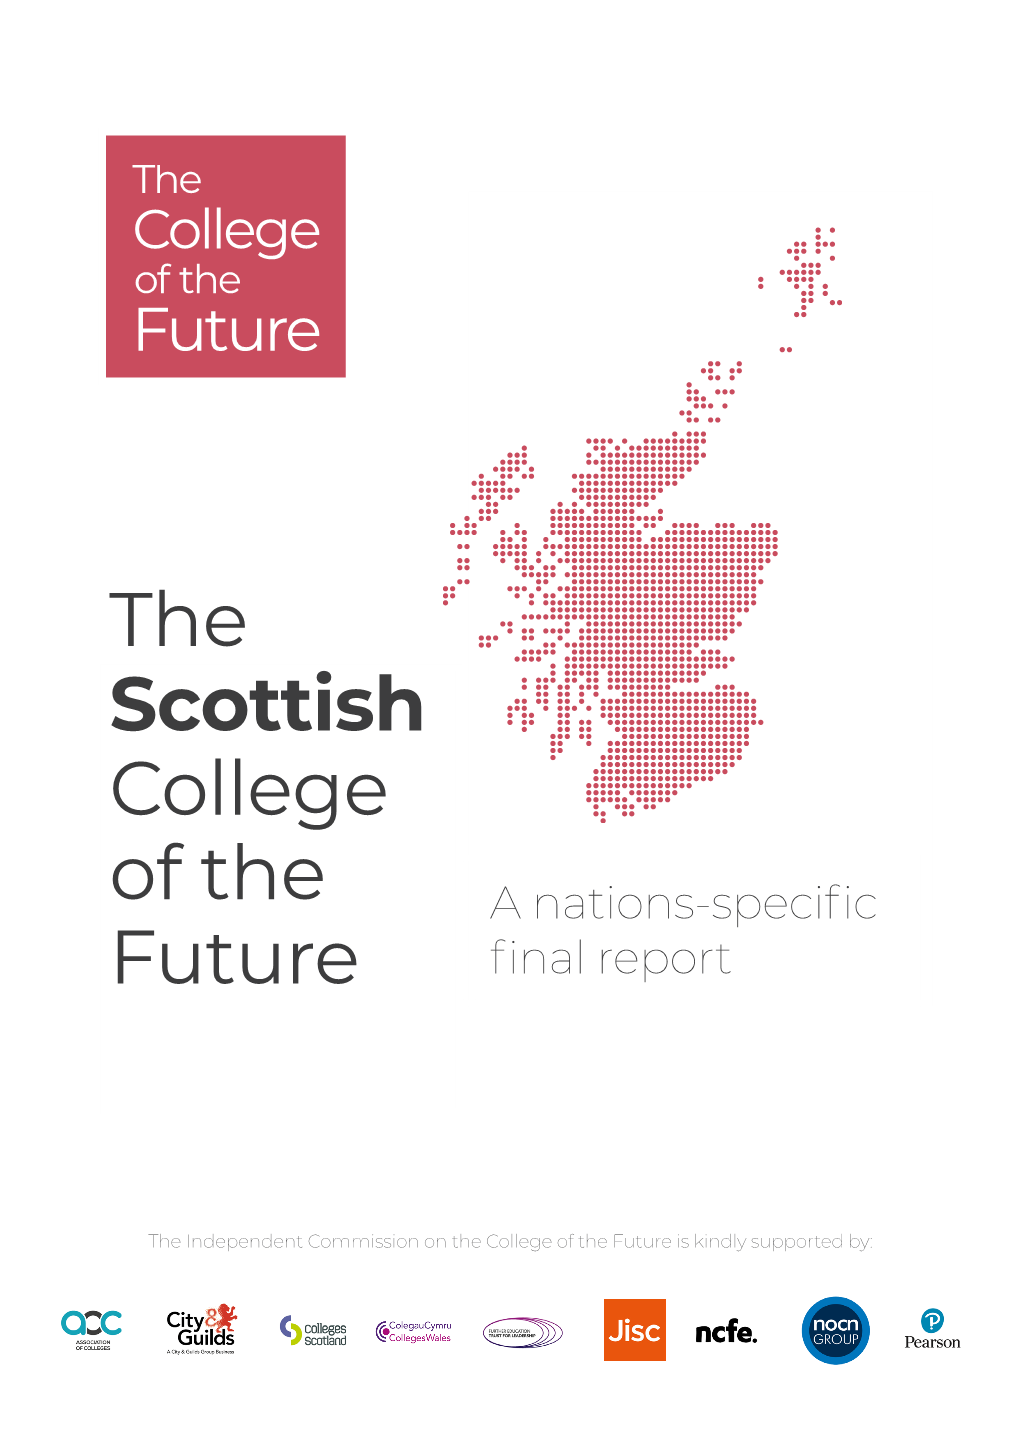 The Scottish College of the Future: a Nations-Specific Final Report 3